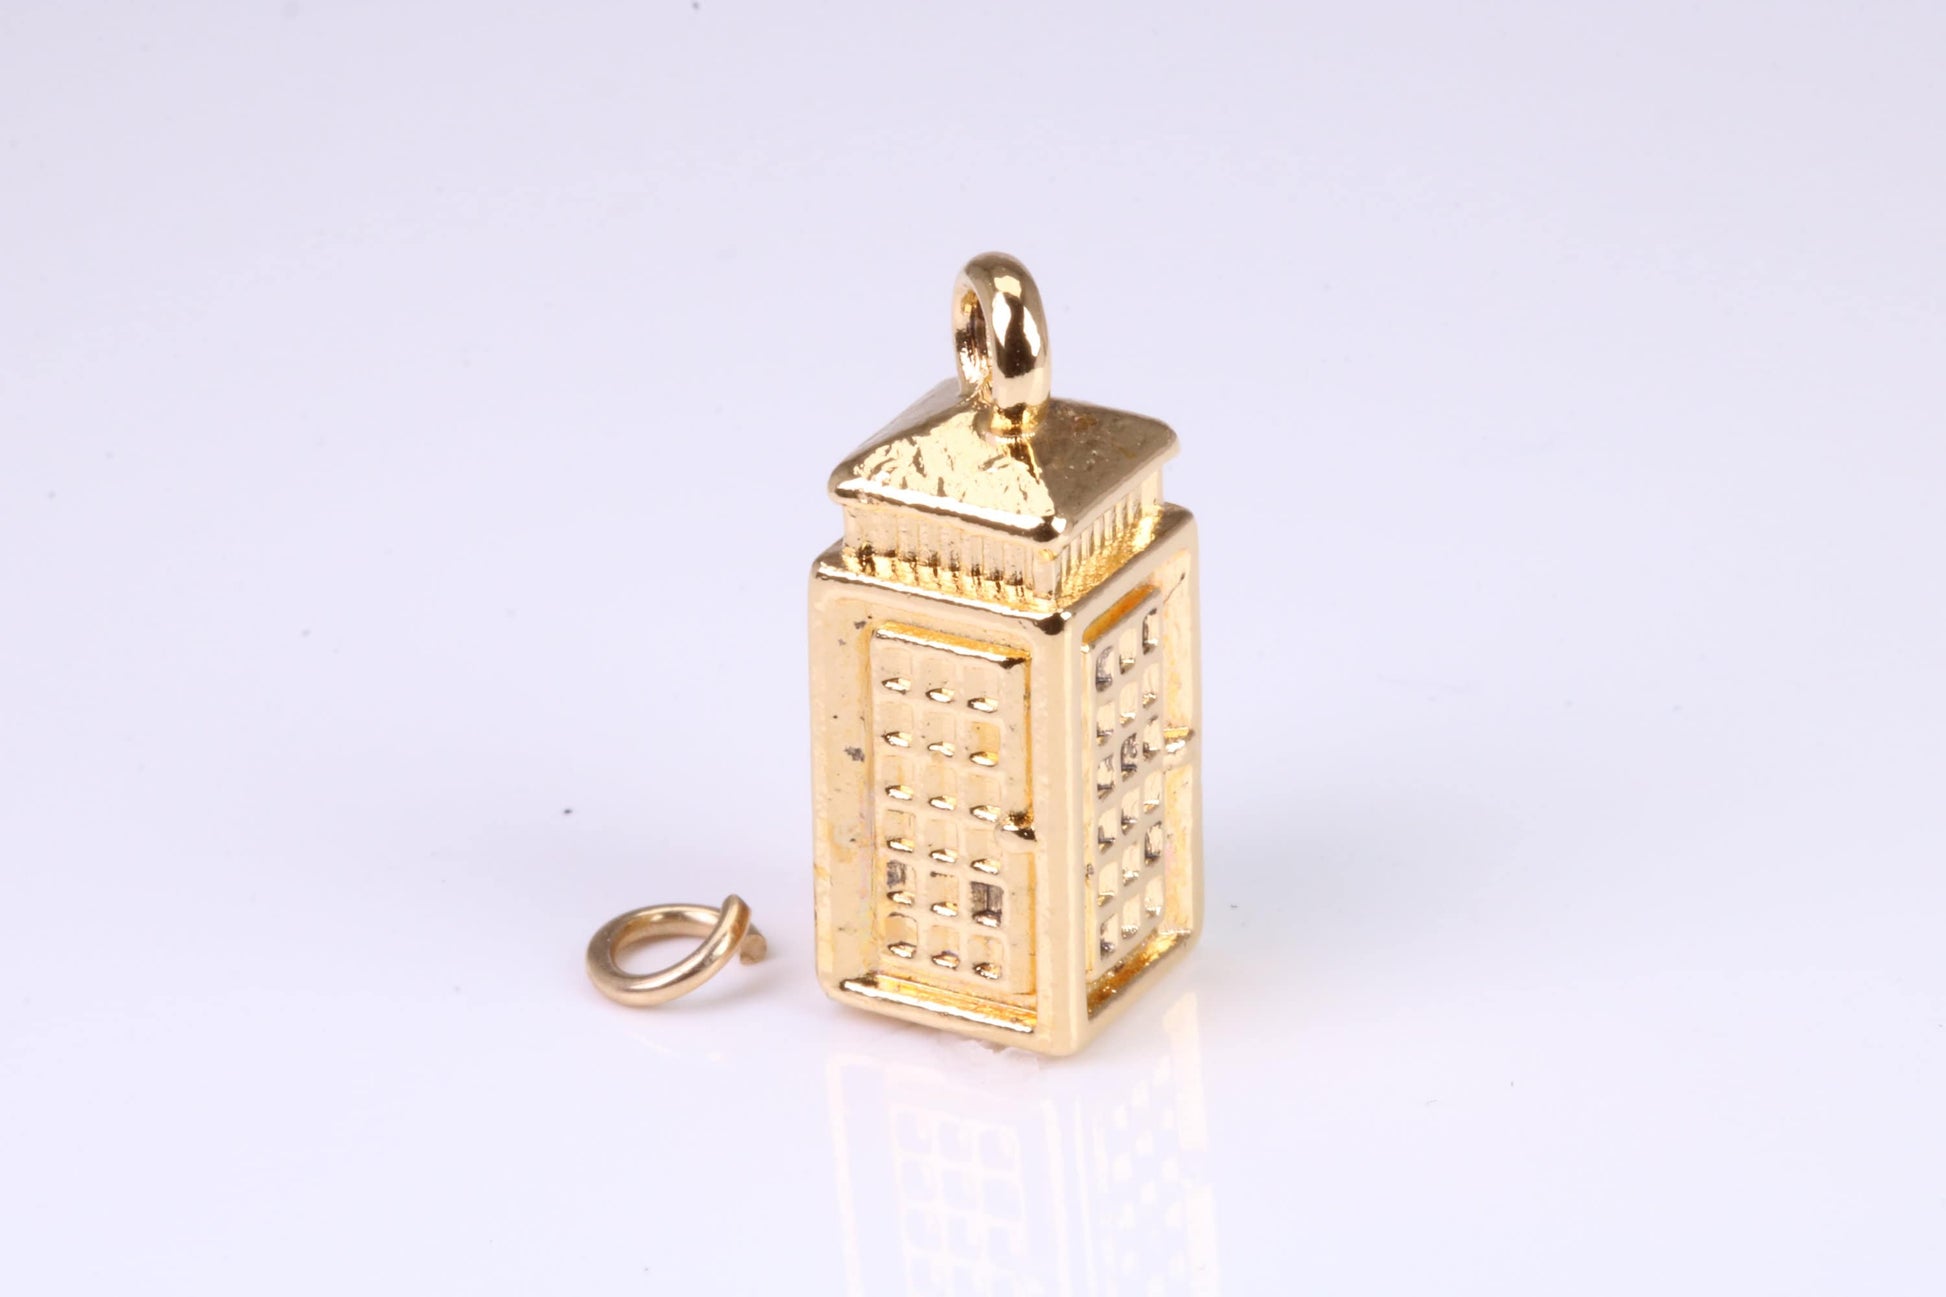 Telephone Booth Charm, Traditional Charm, Made from Solid Yellow Gold, British Hallmarked, Complete with Attachment Link